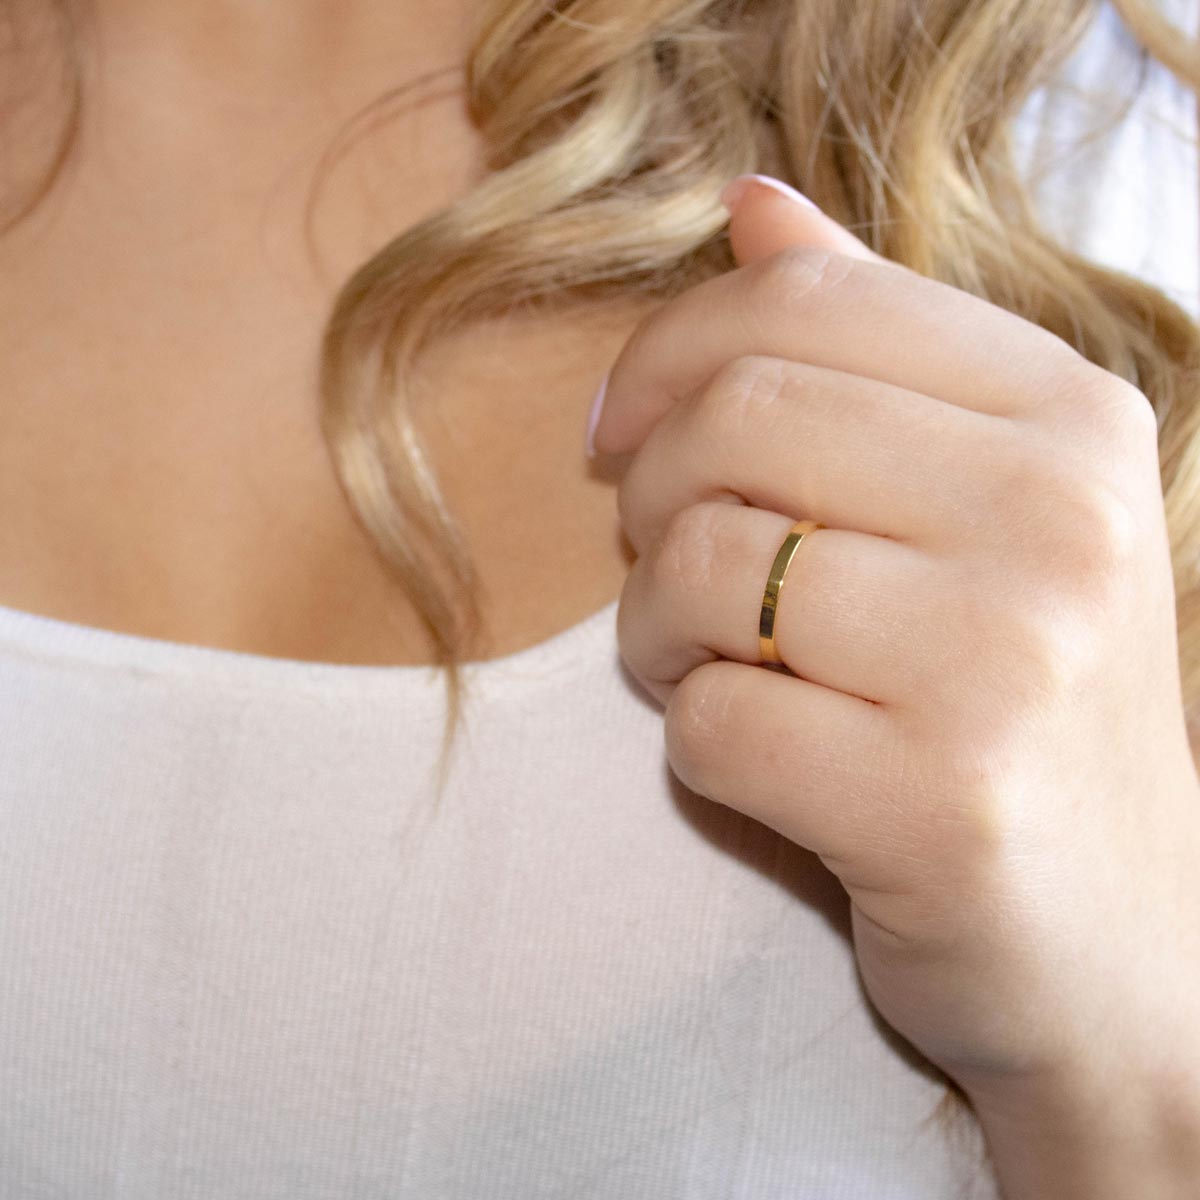 Stackable Plain Flat Ring